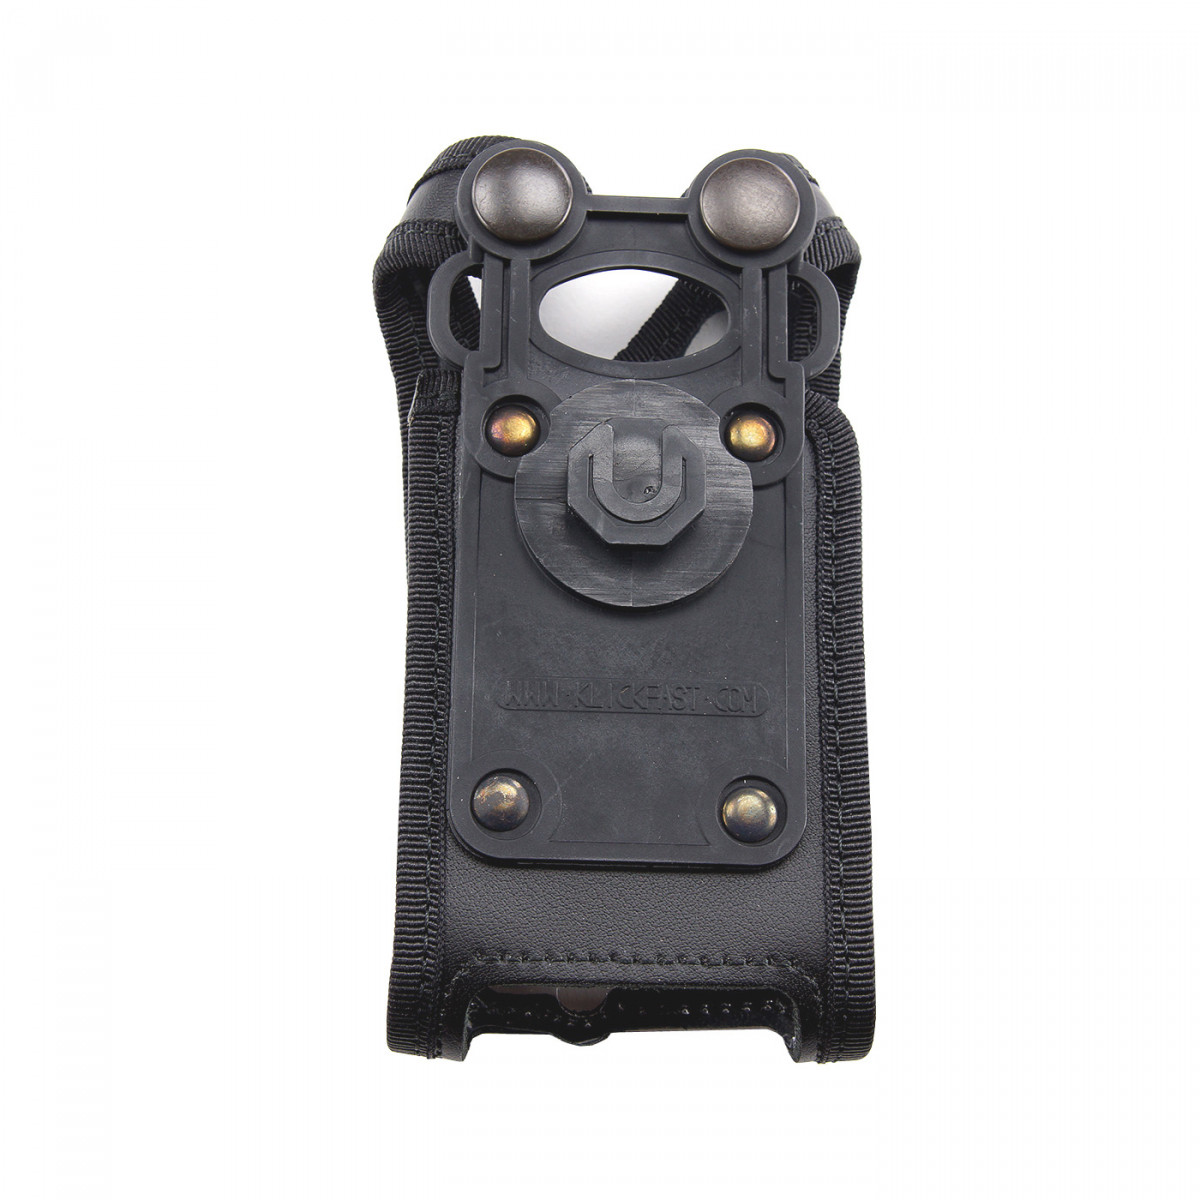 SEPURA Robust leather case with quick-release mount, 50mm, for Sepura SRH2x00/3x00 300-00043